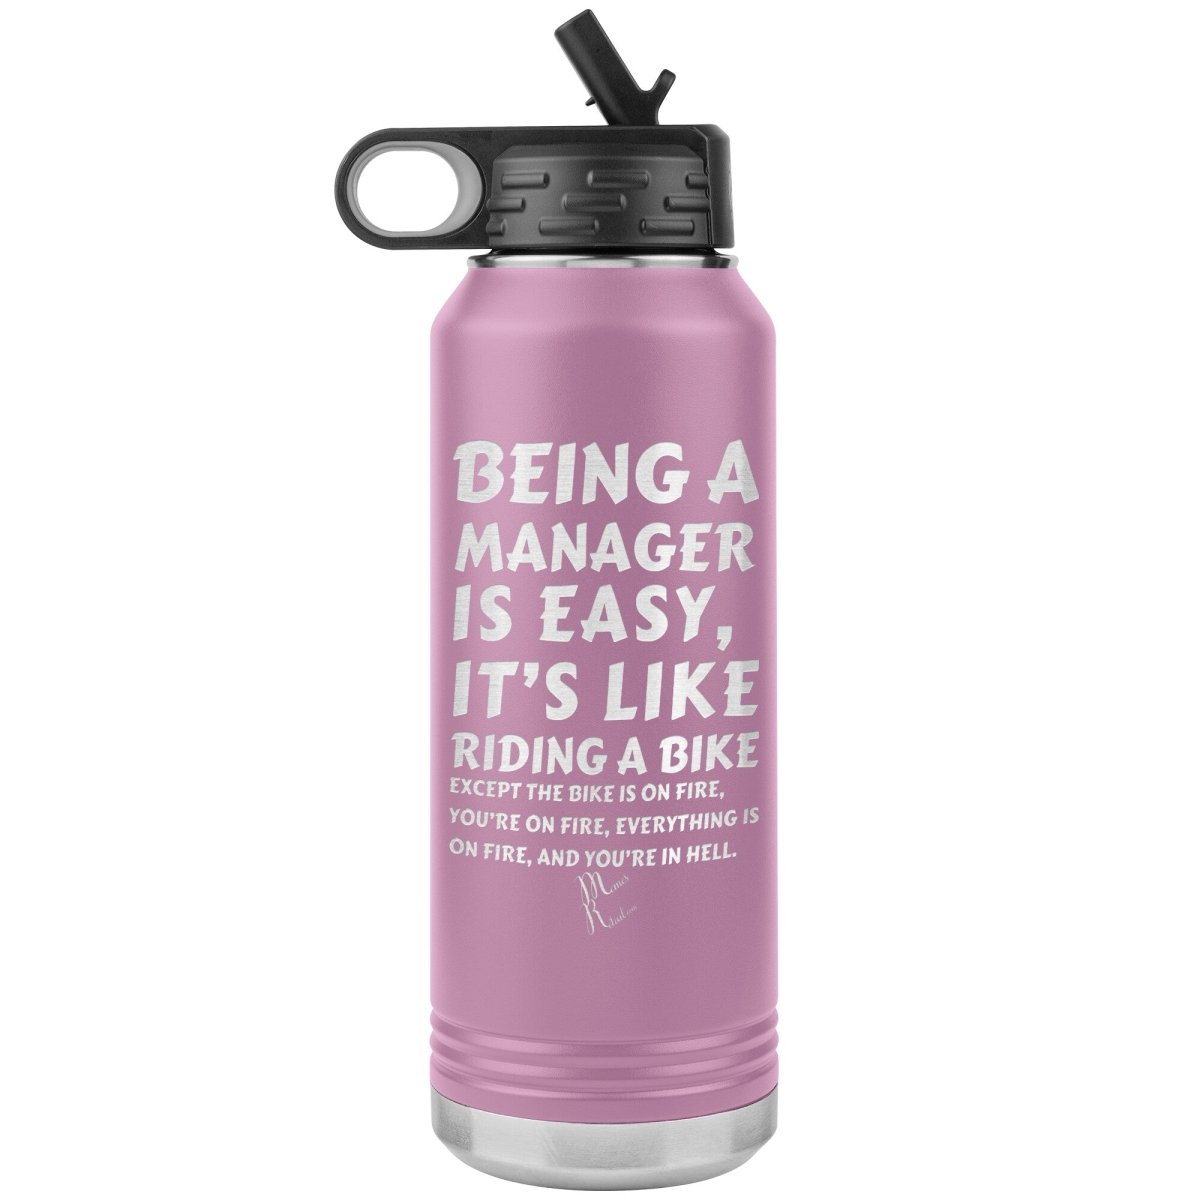 Being a manager is easy….32oz Water Tumbler, Light Purple - MemesRetail.com